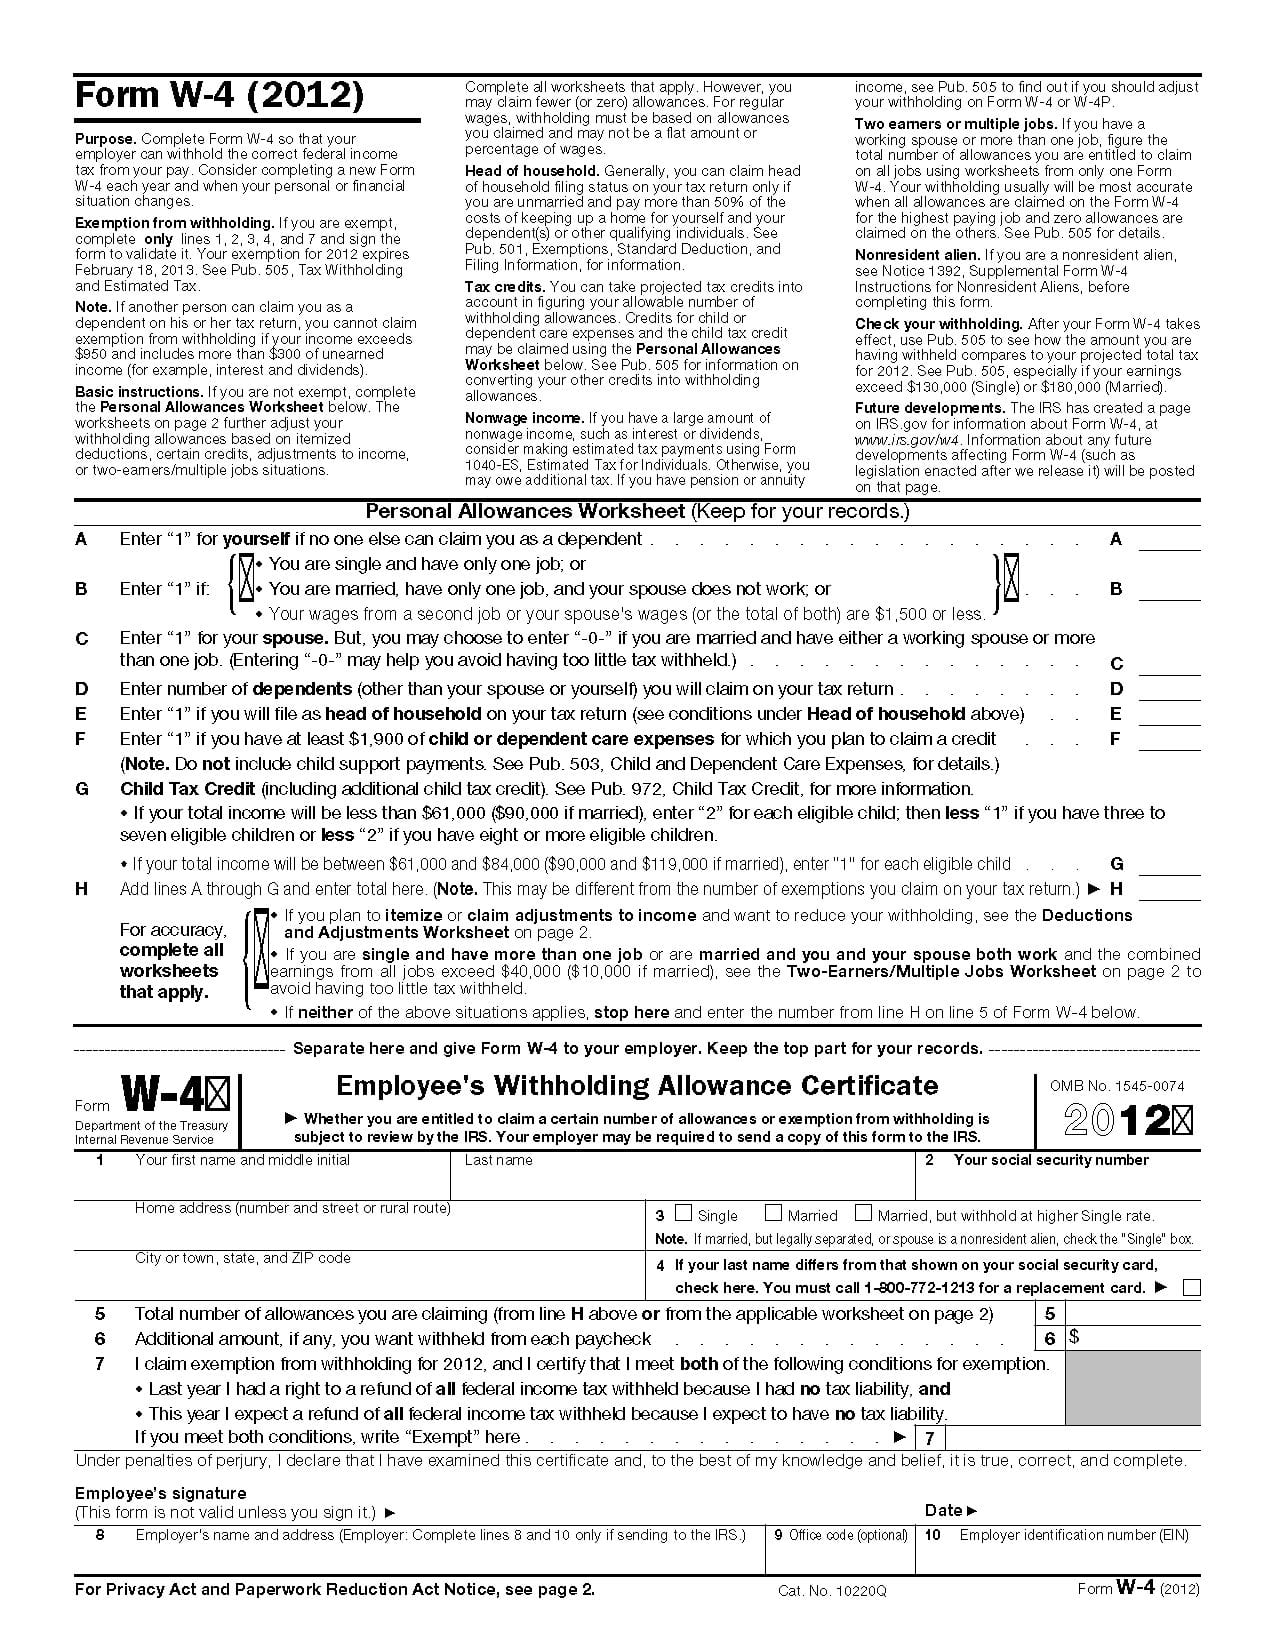 Form W4 Employee's Withholding Allowance Certificate Throughout Form W 4 Worksheet